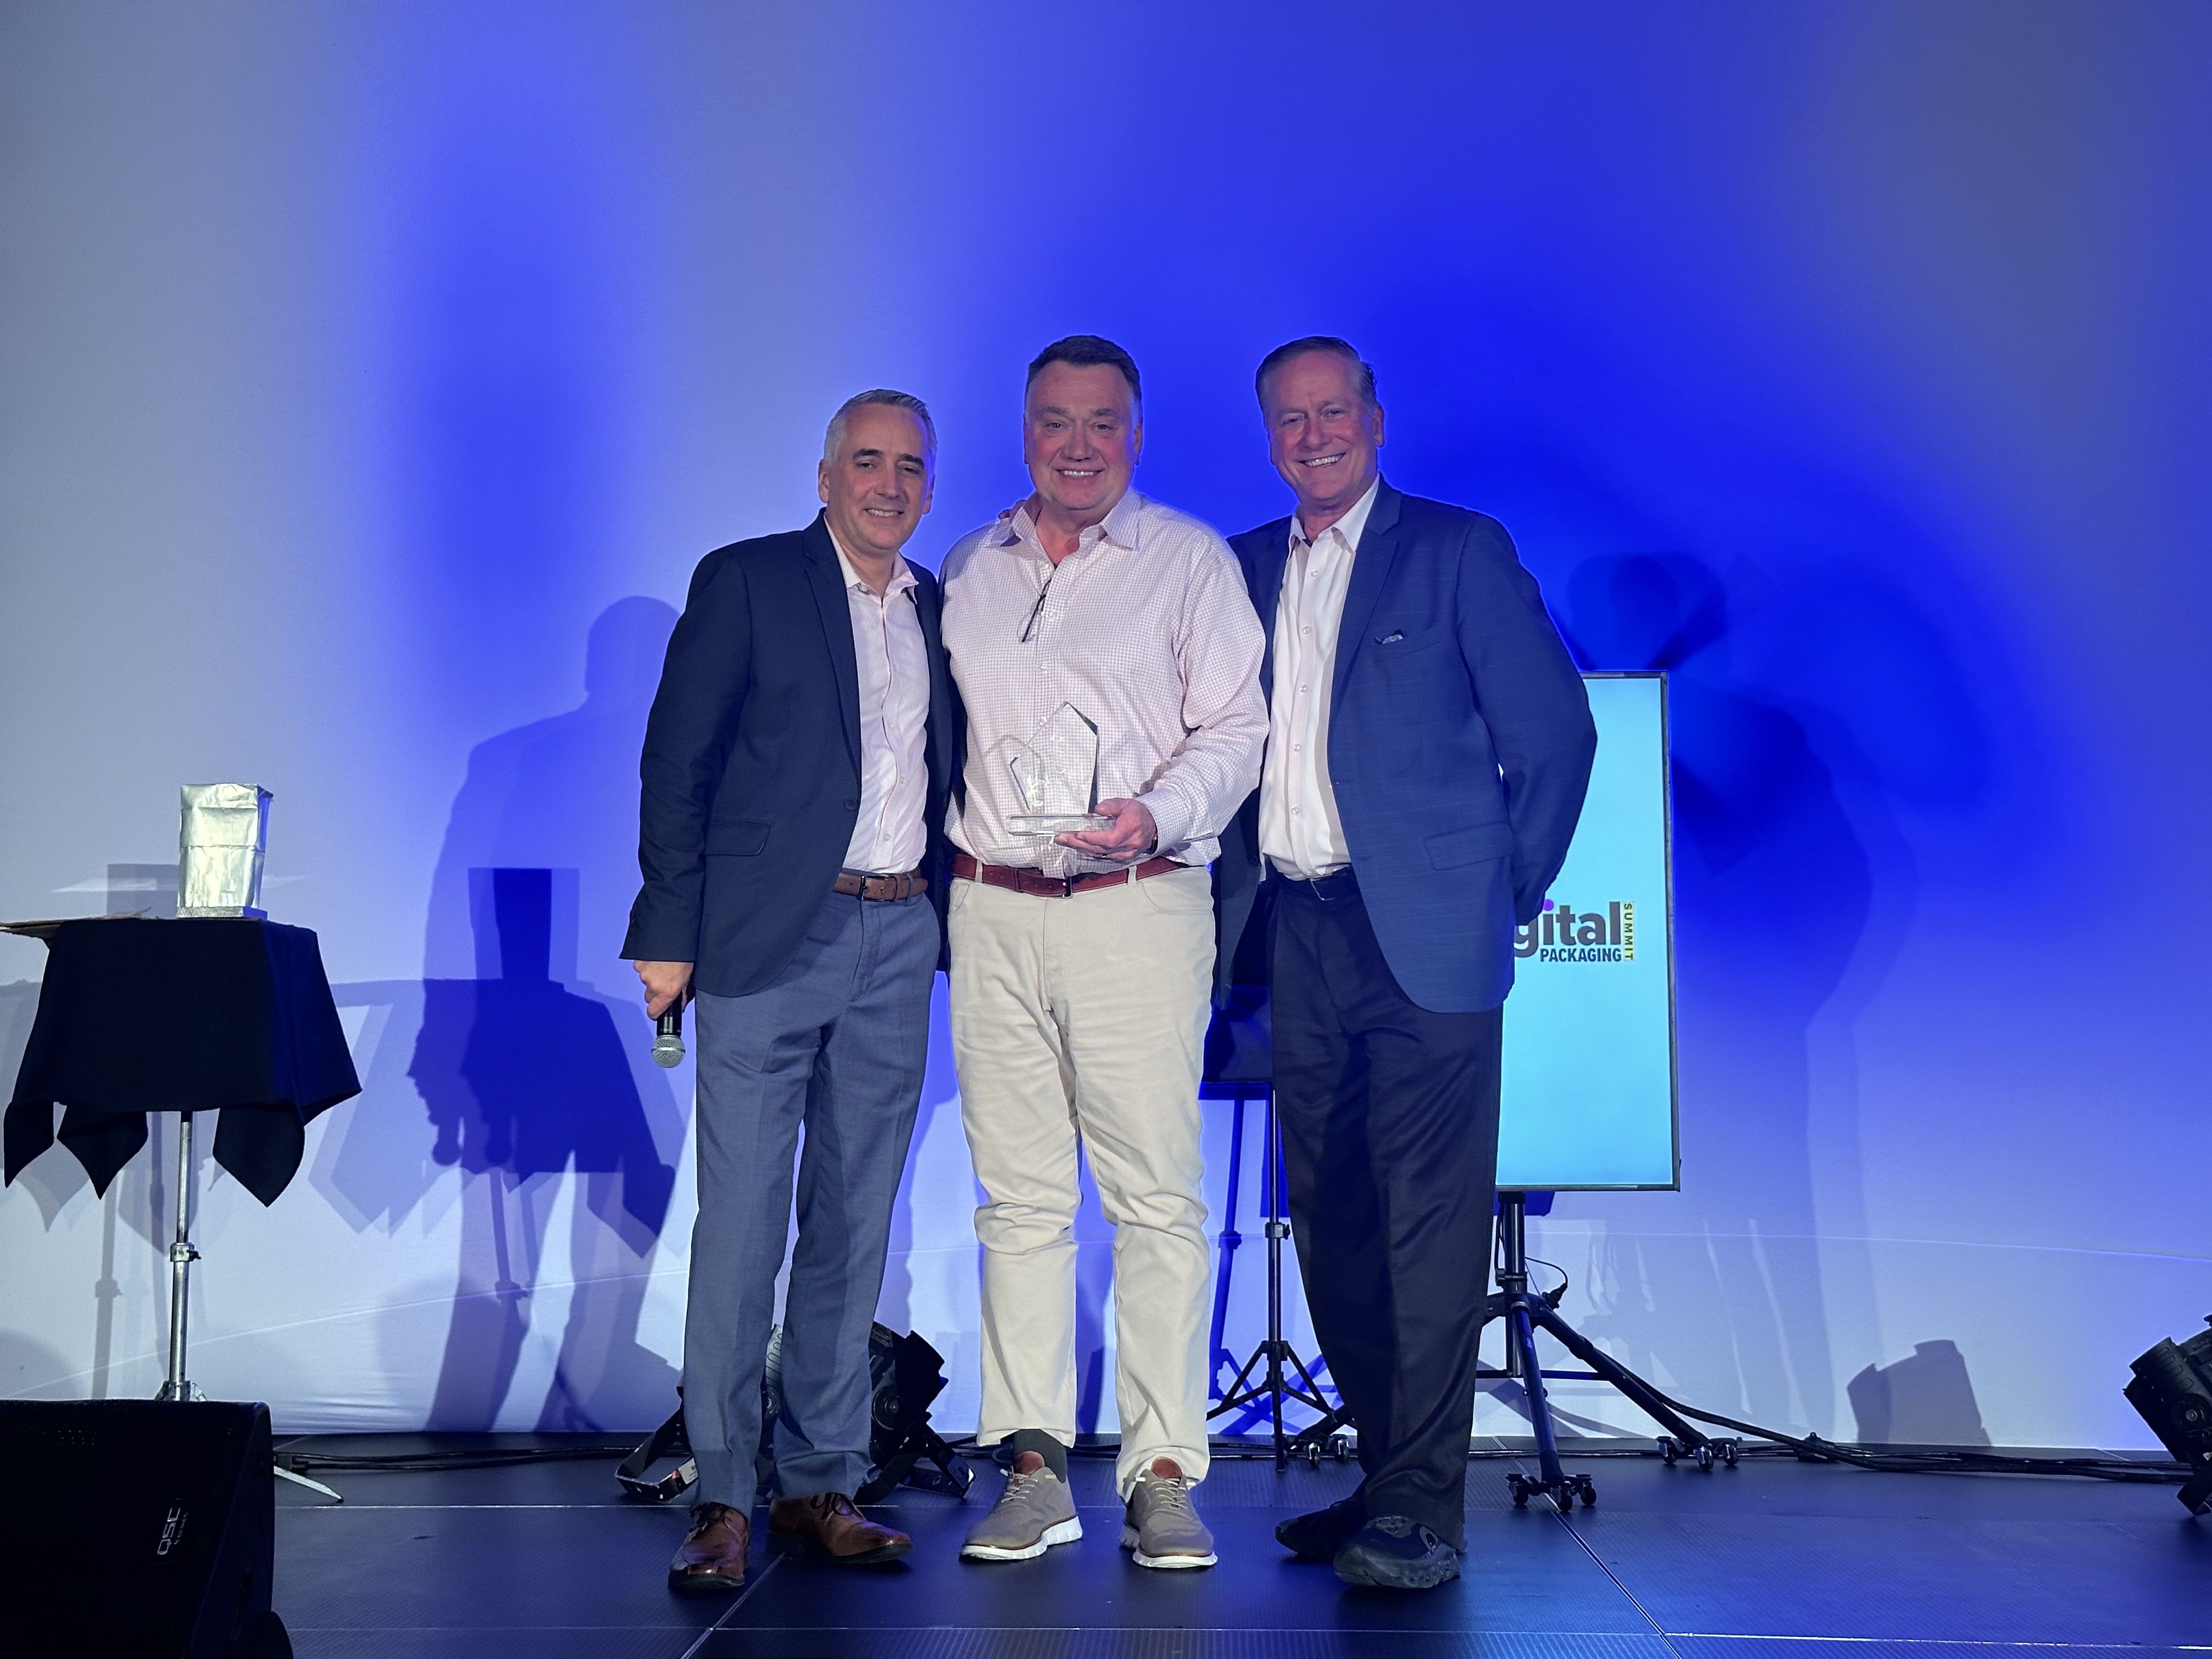 IMAGE CAPTION: Ken Brown, BOBST Product Business Development Manager (center), receiving the award from Event Director David Pesko (L) and Chris Lyons (R).